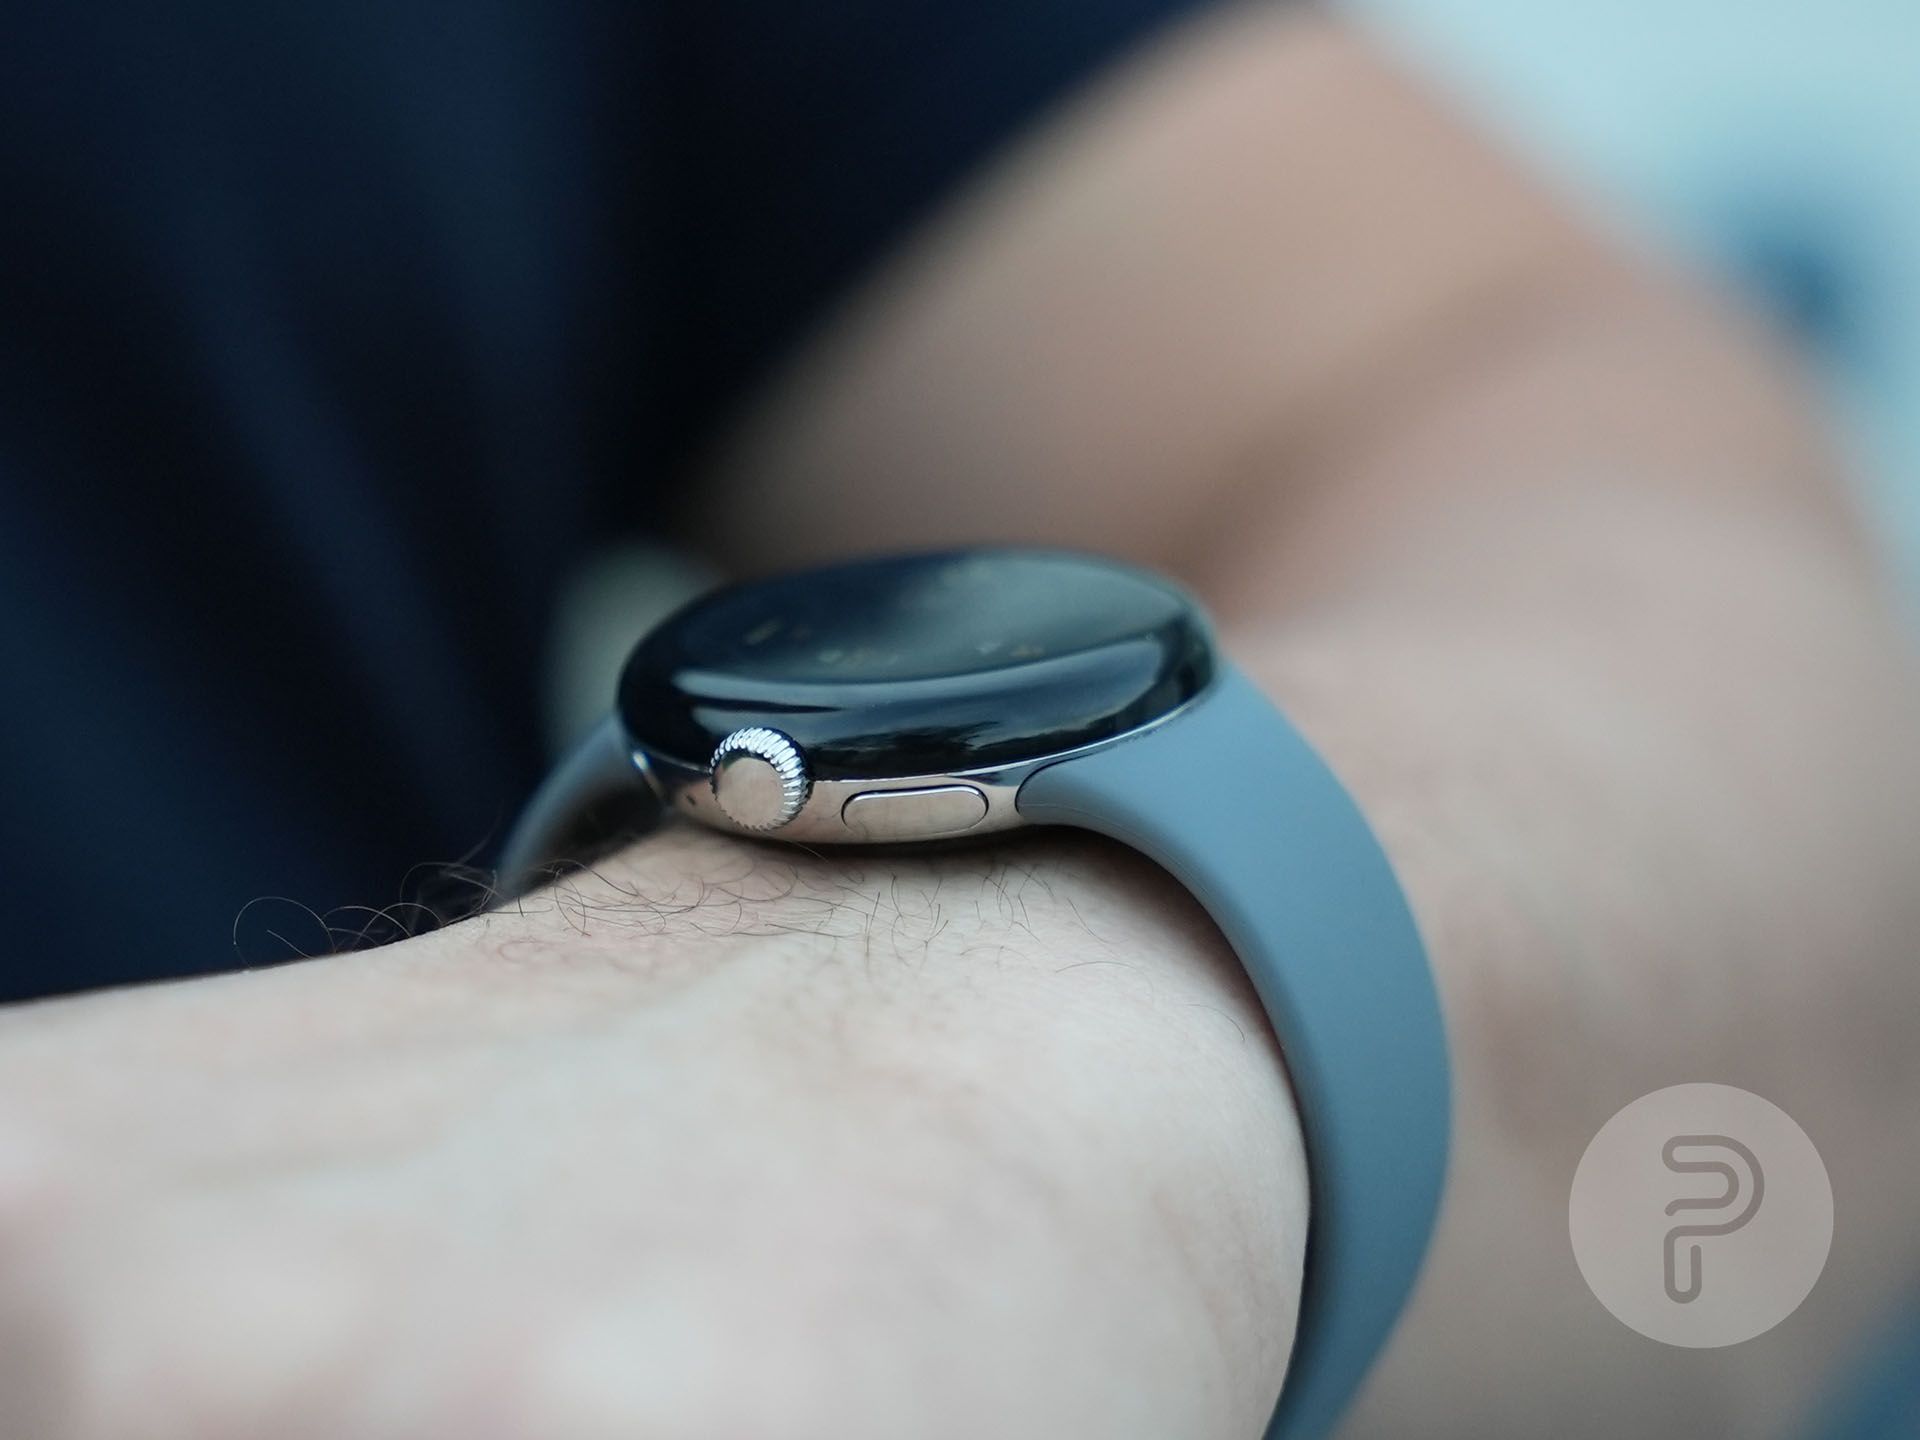 The Pixel Watch Has Landed. What Does That Mean for Wear OS?